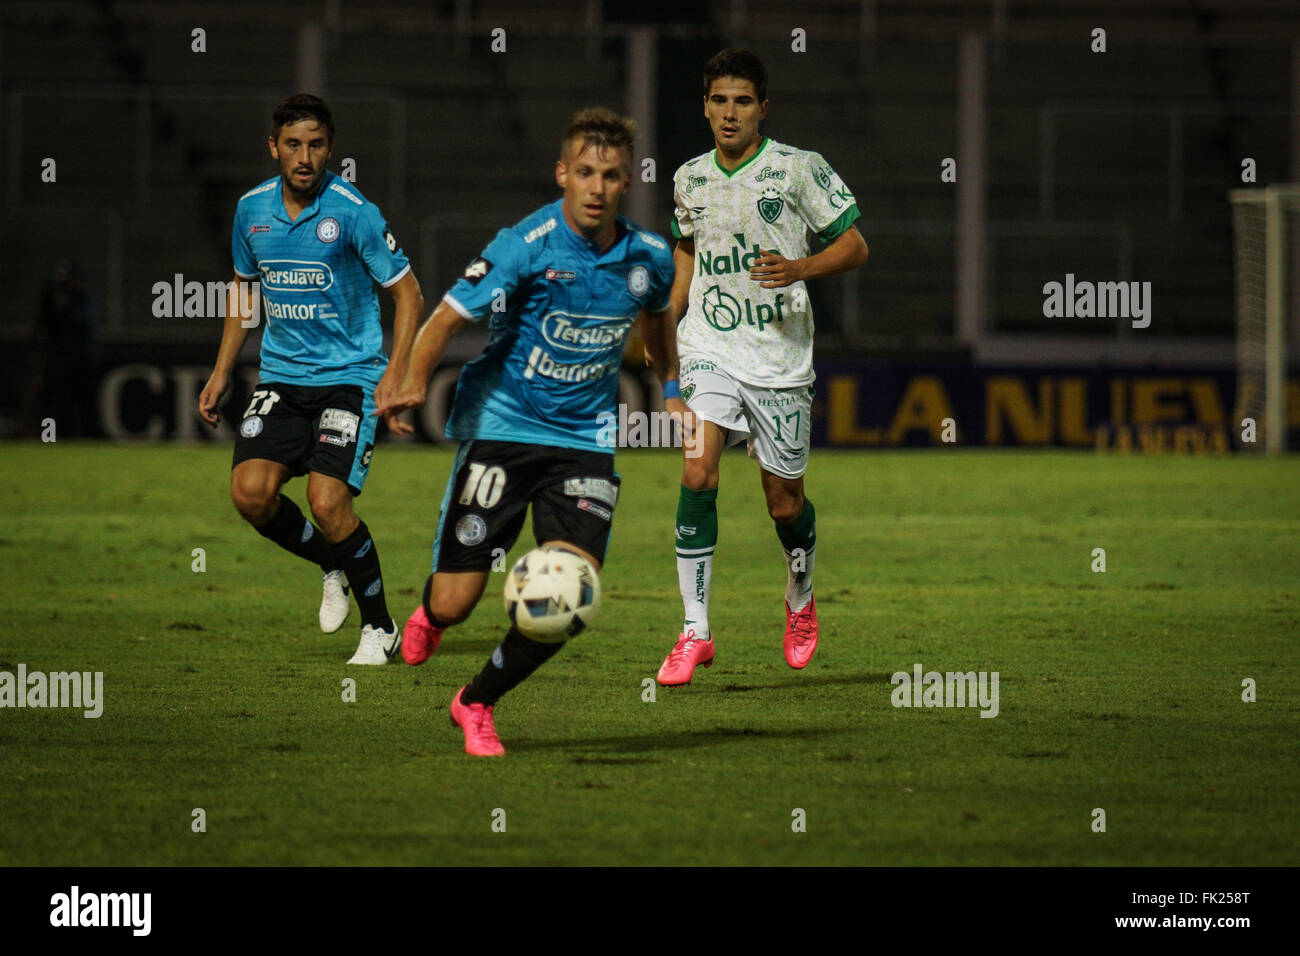 Cordoba, Argentina. 5th March, 2016. Ivan Etevenaux, Midfield player de Belgrano during a match between Belgrano and Sarmiento as part of the sixth round of Primera Division. in Mario Kempes Stadium on March 05, 2014 in Cordoba, Argentina. Stock Photo